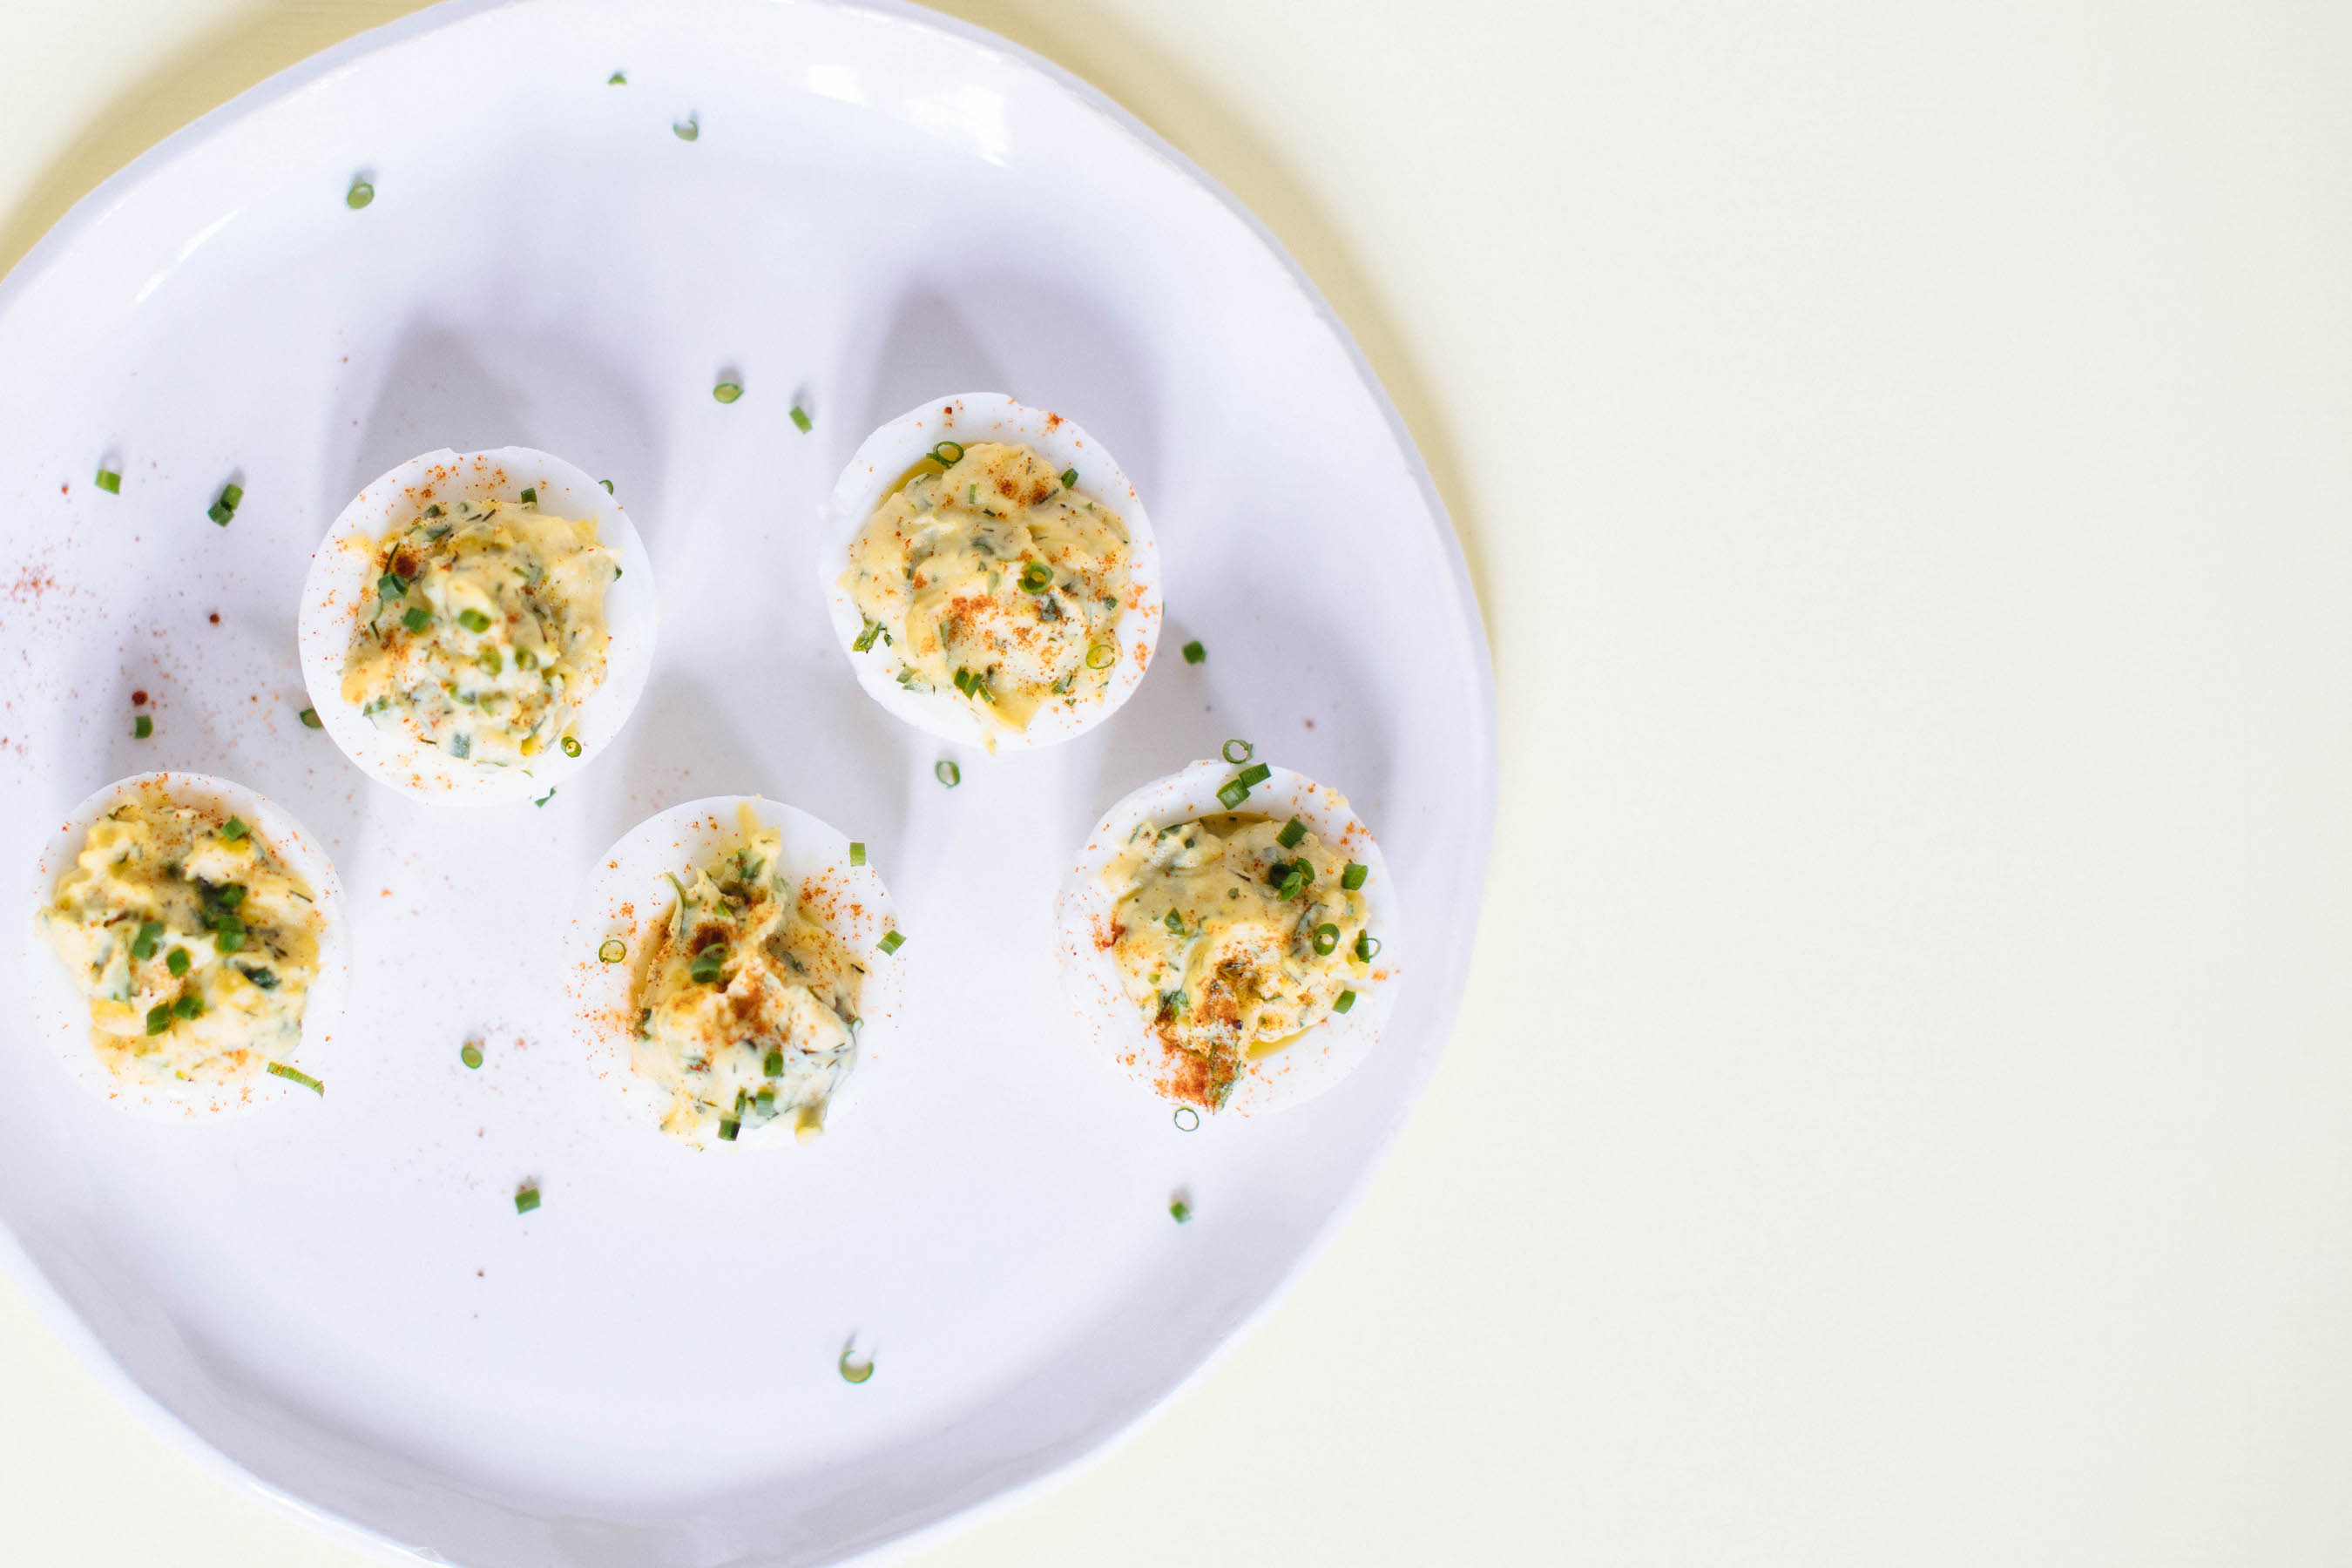 Herbed Egg Canape Recipe With Dijon Mustard